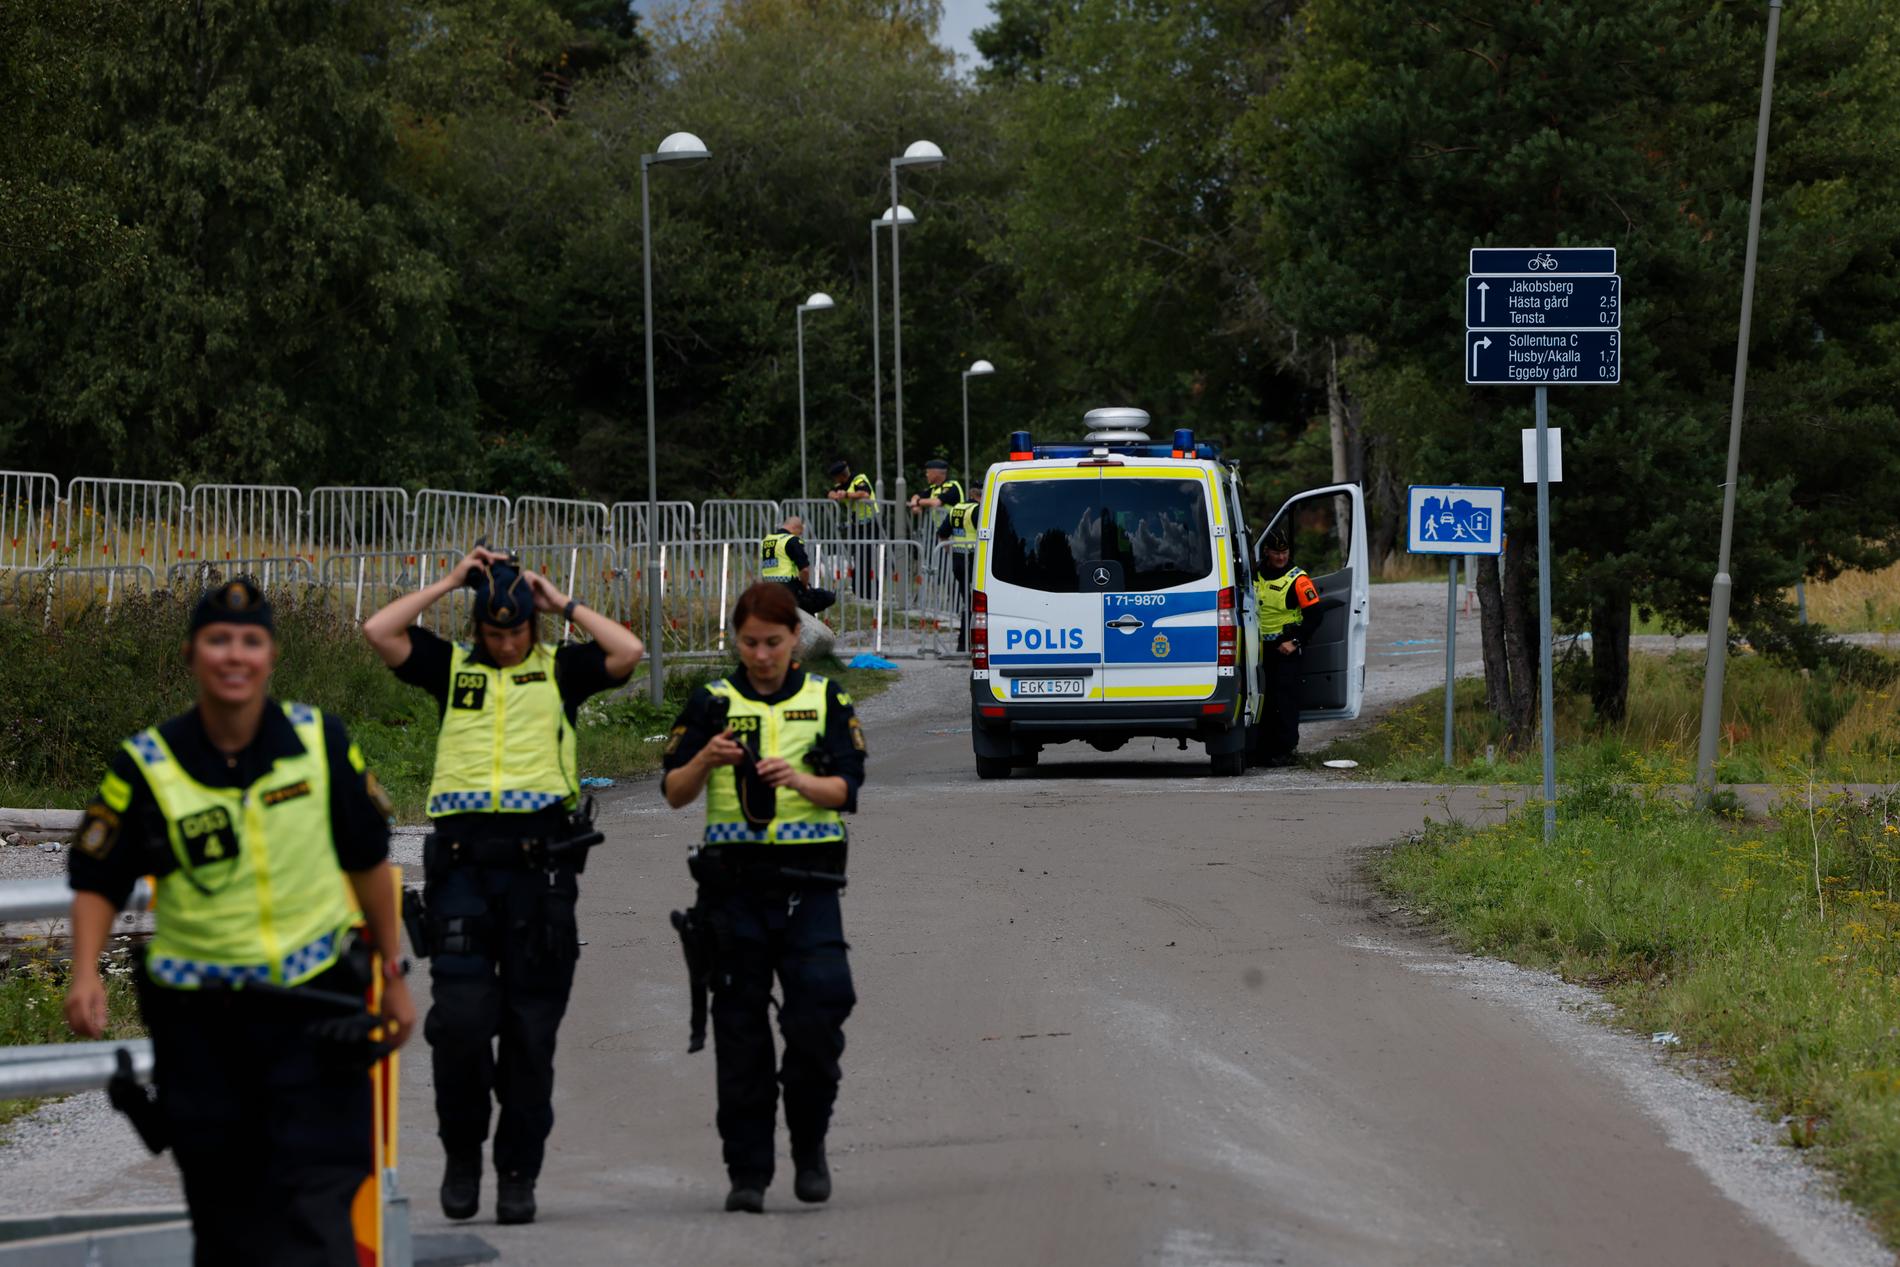 During Friday, the police had equipped themselves at Järvafältet.